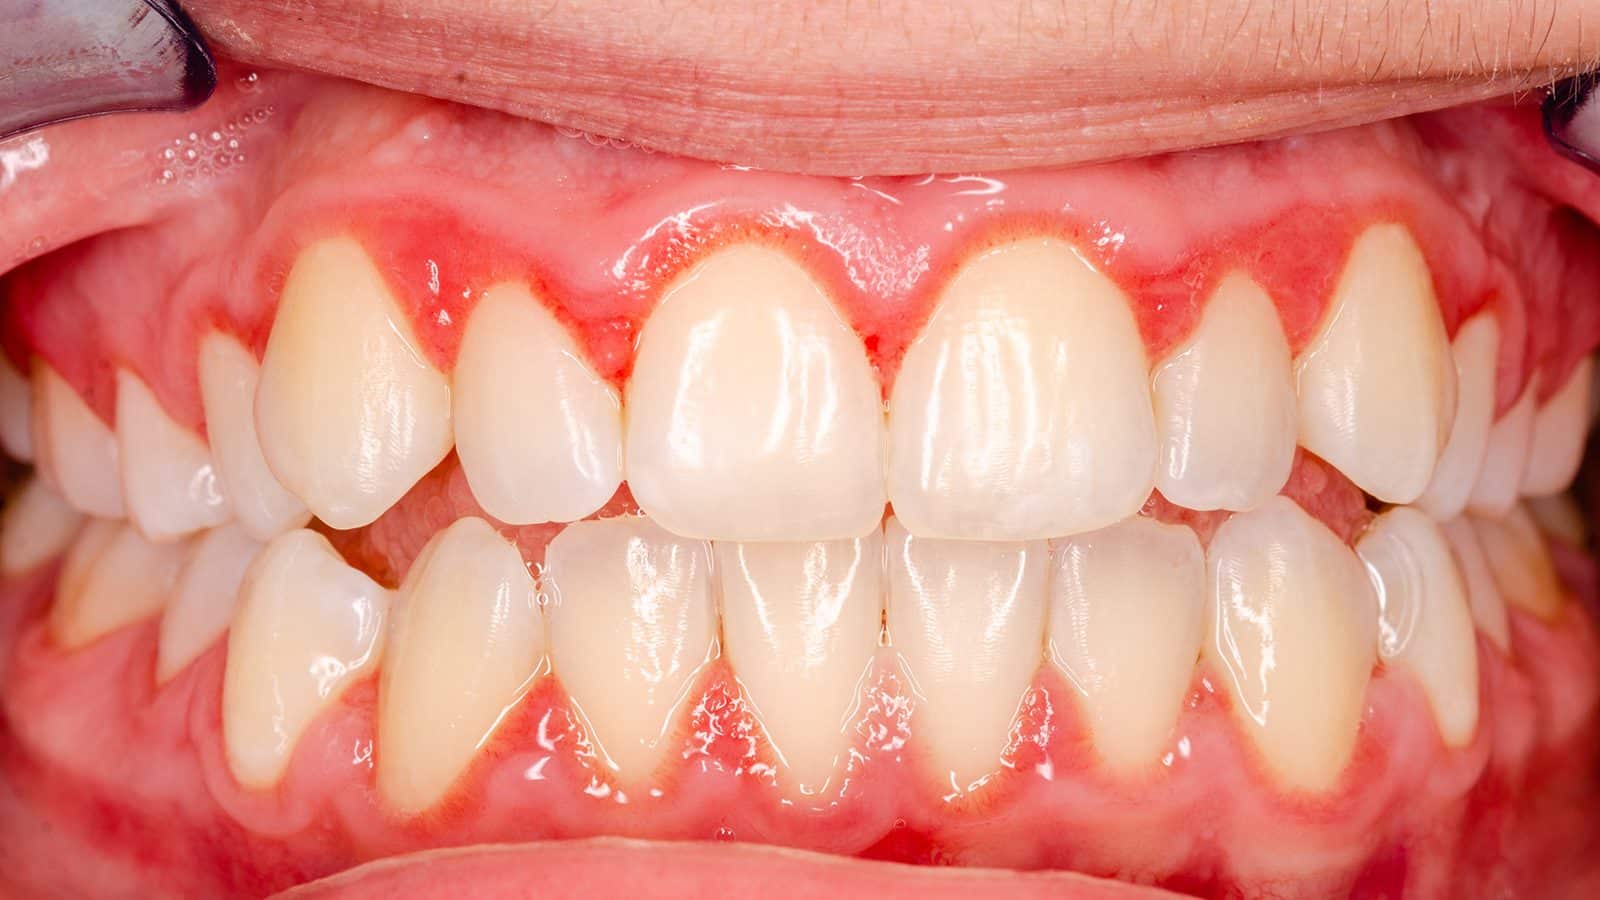 Swollen Gums Reveal These 7 Things About Your Health